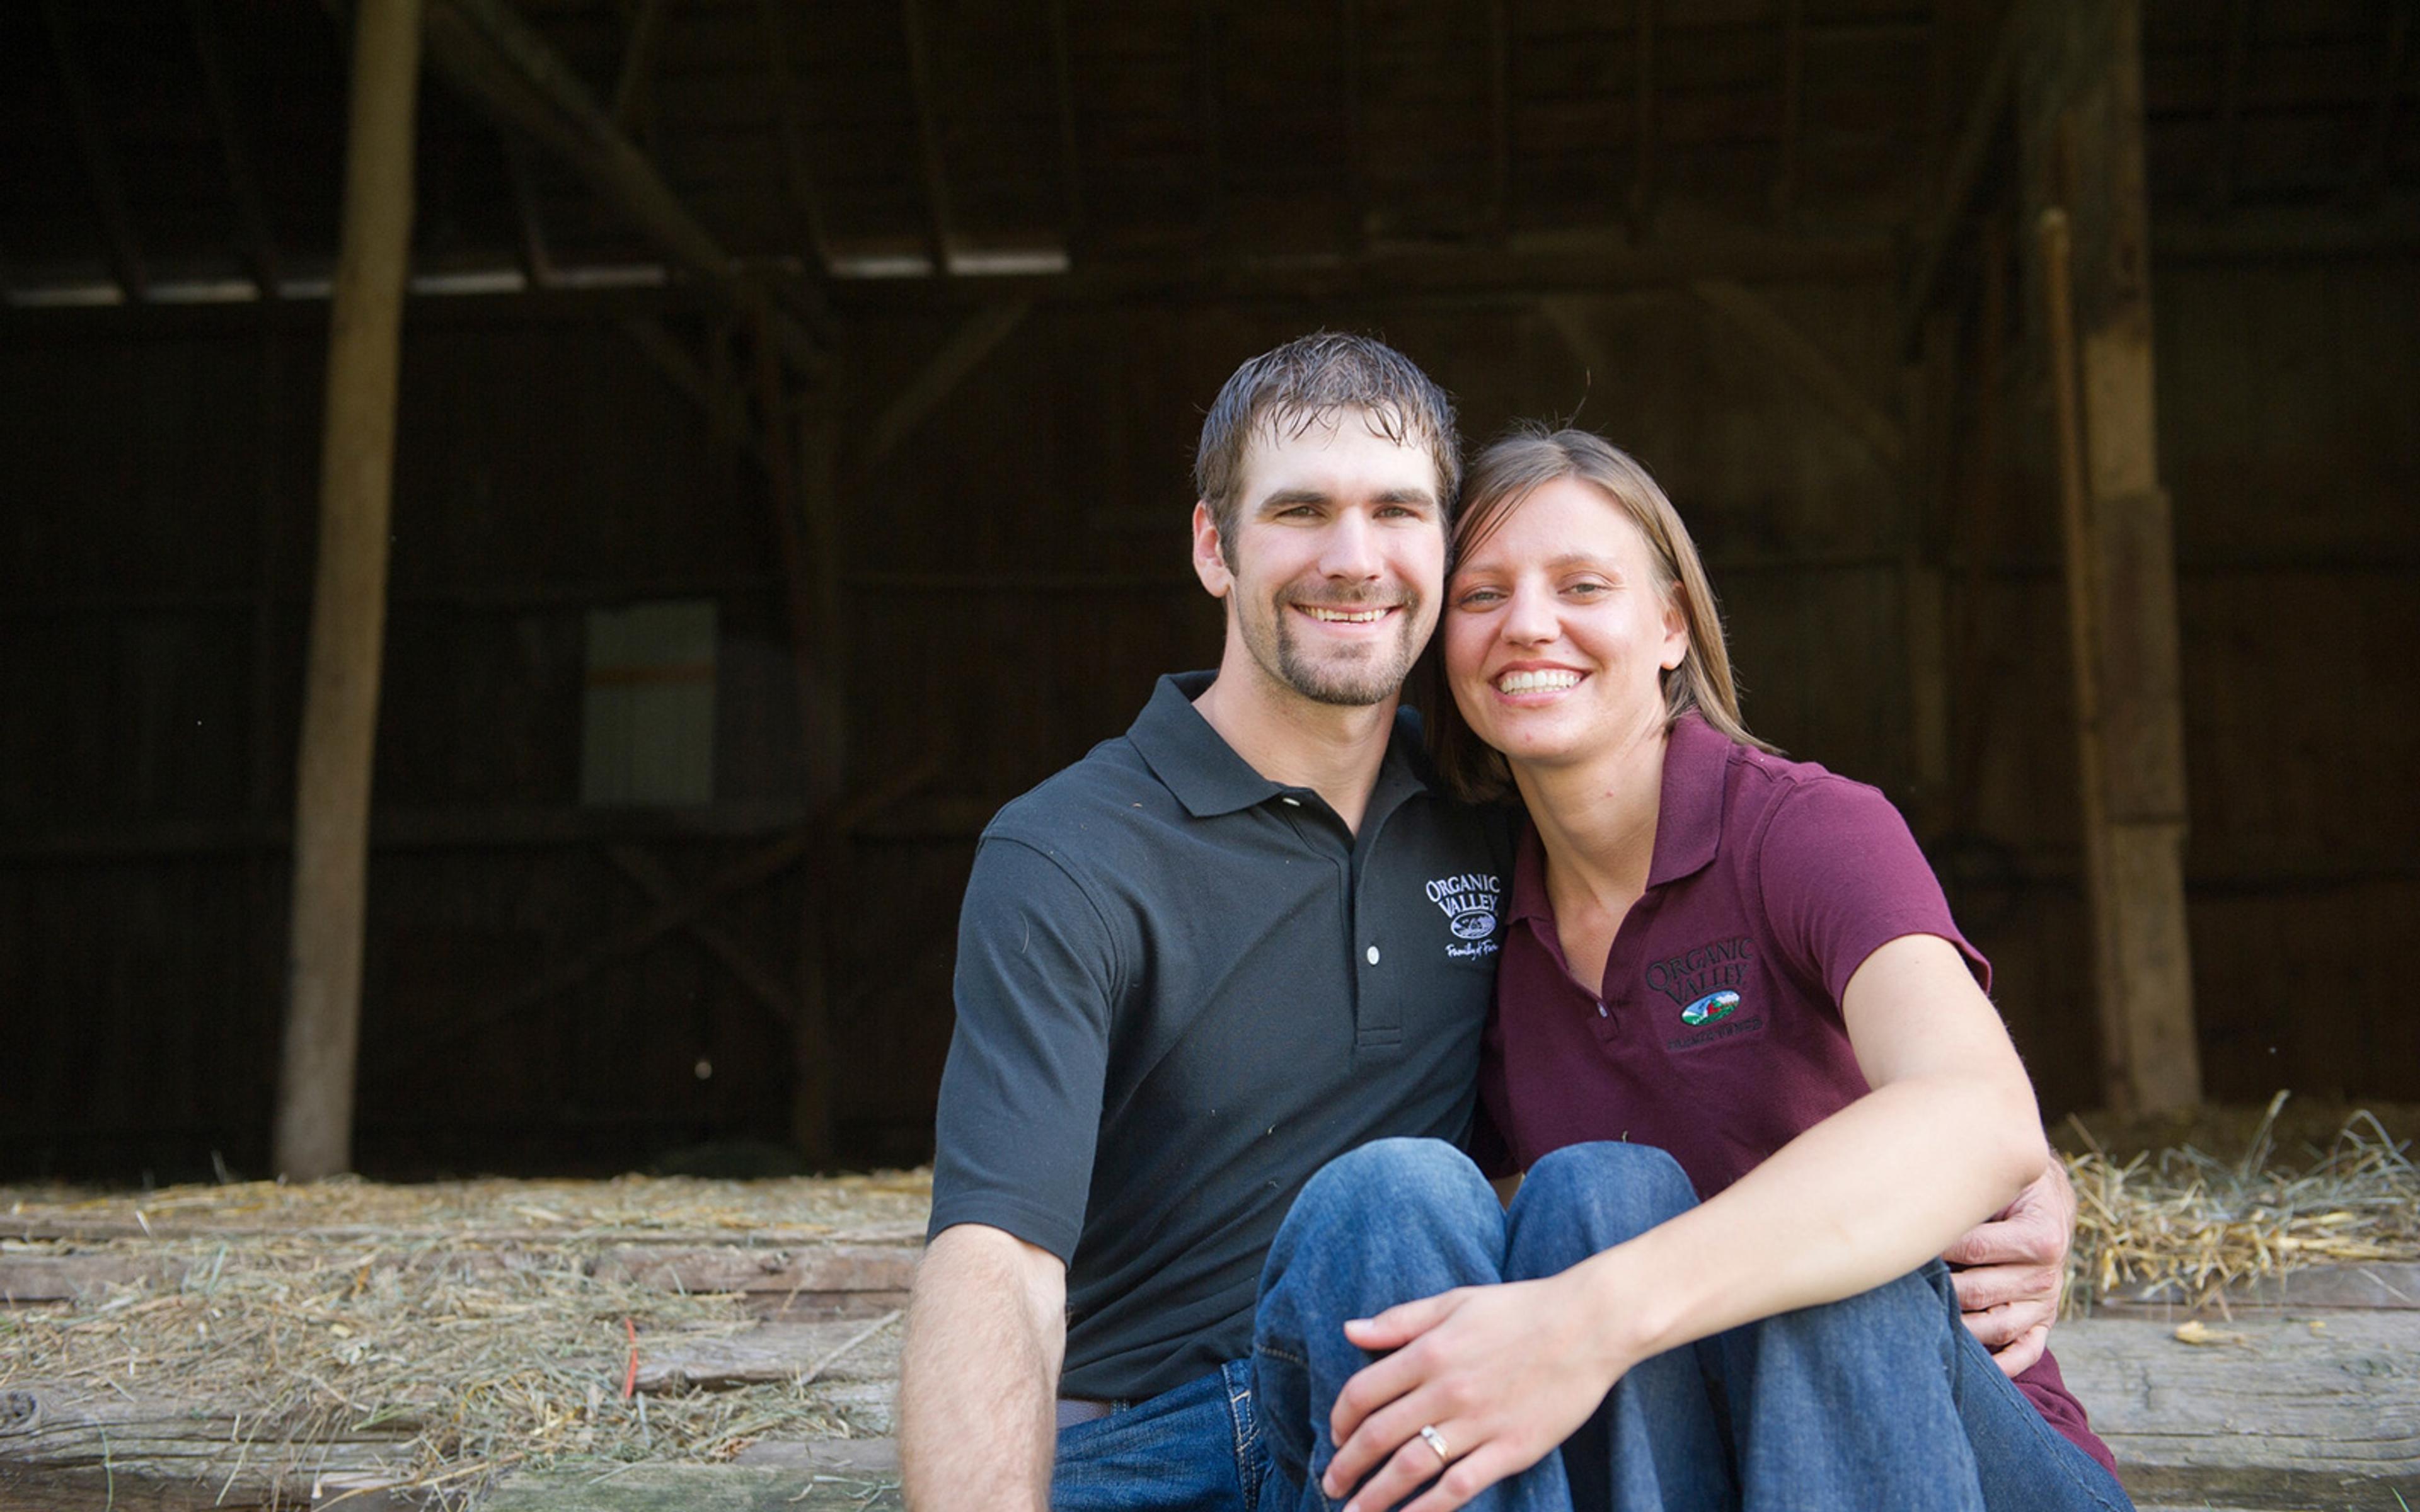 Emily and Tim Zweber are true partners on their farm, sharing the work and supporting one another.